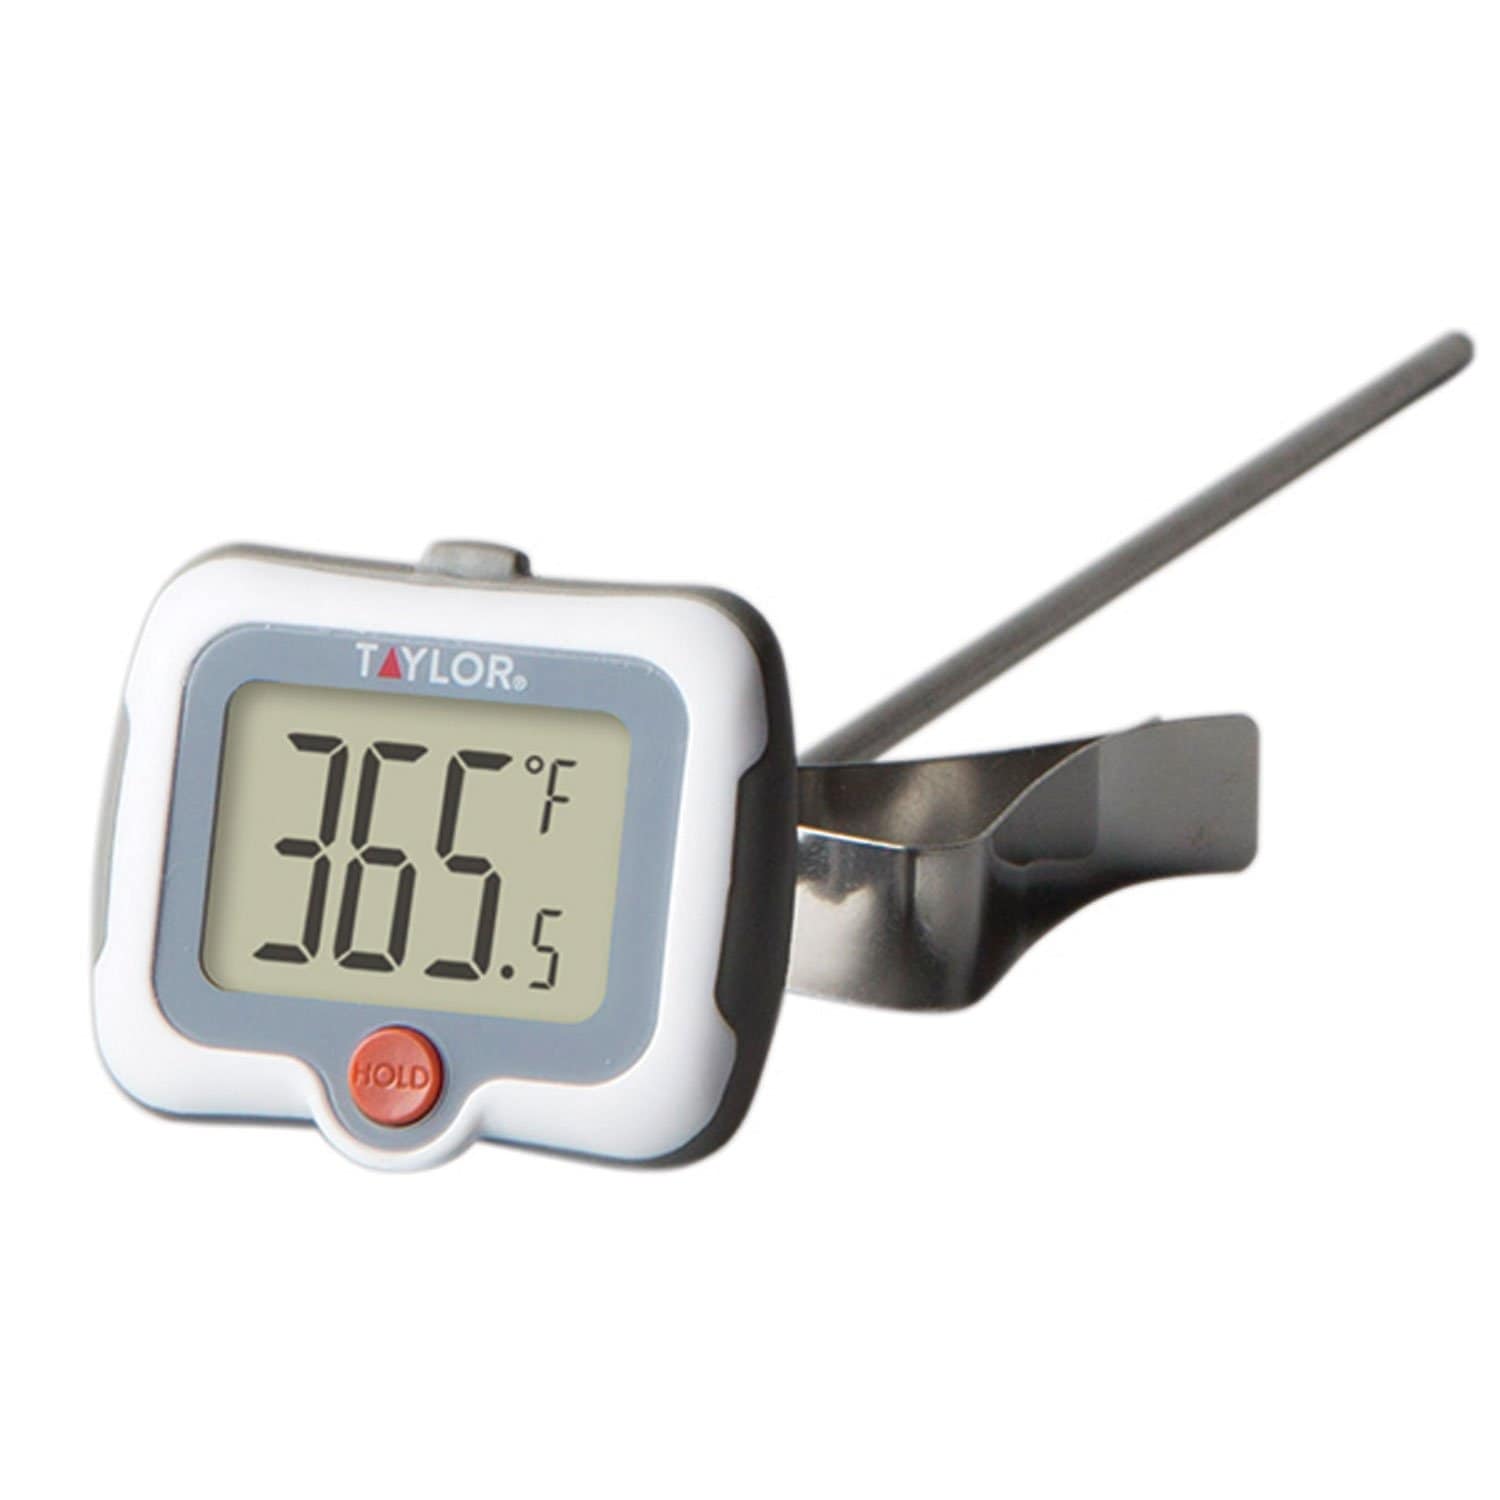 Taylor 9839-15 9 Swivel Head Digital Candy / Deep Fry Probe Thermometer